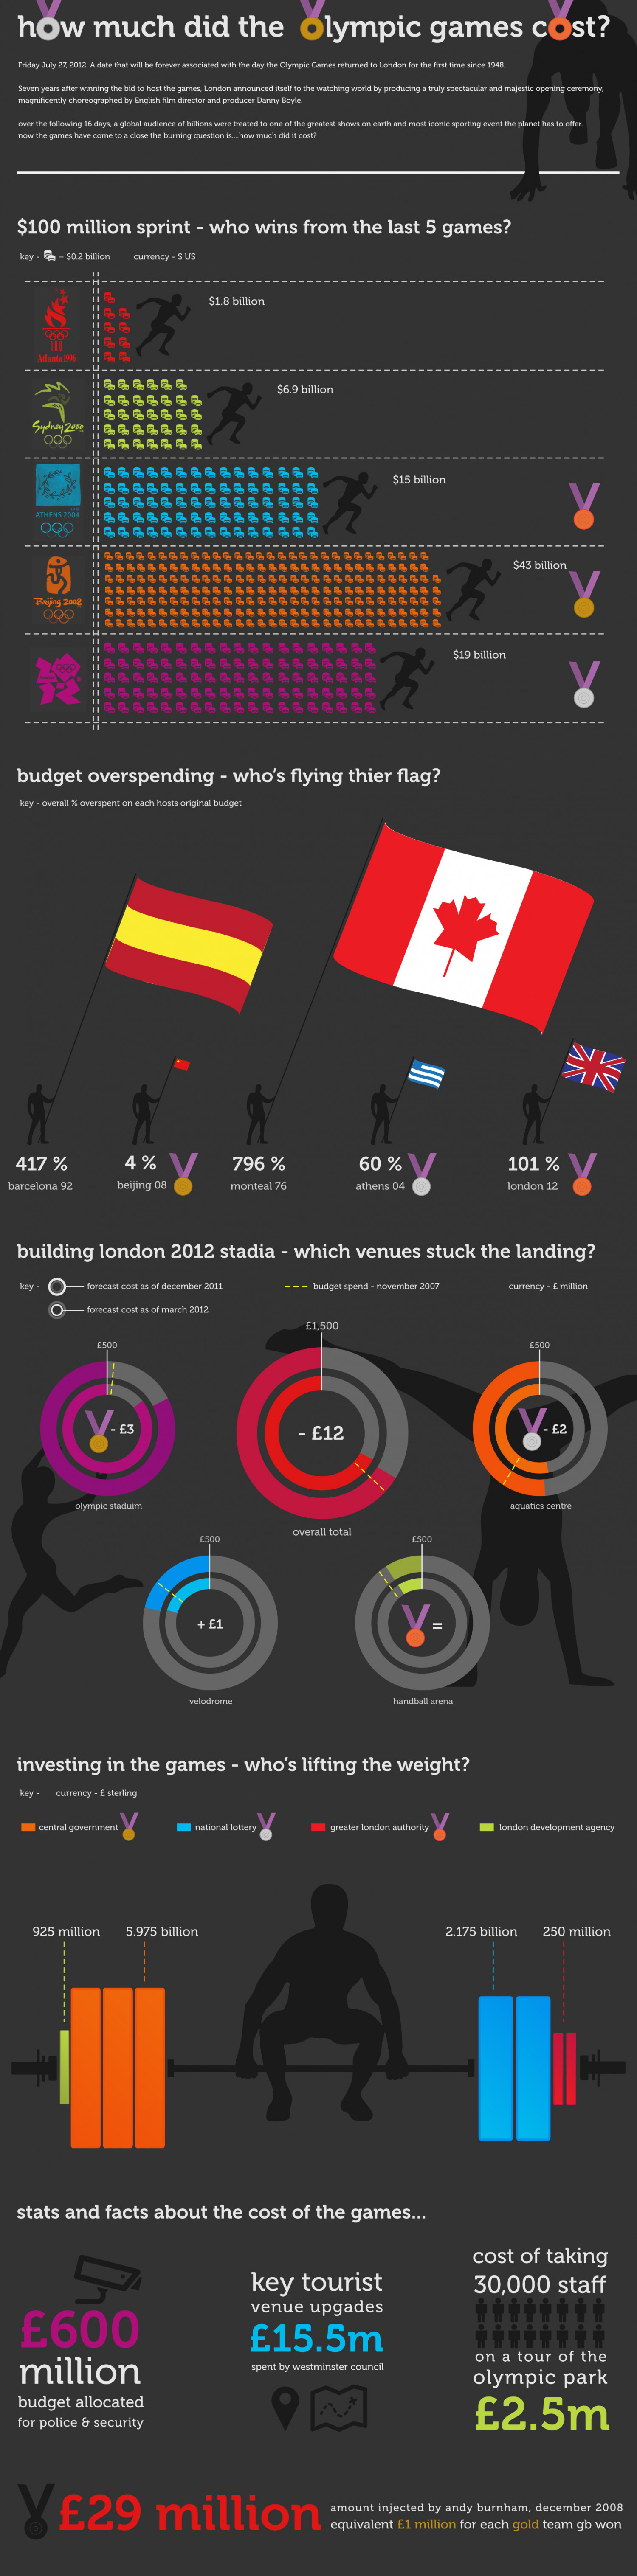 How Much Did the Olympics Cost? Infographic